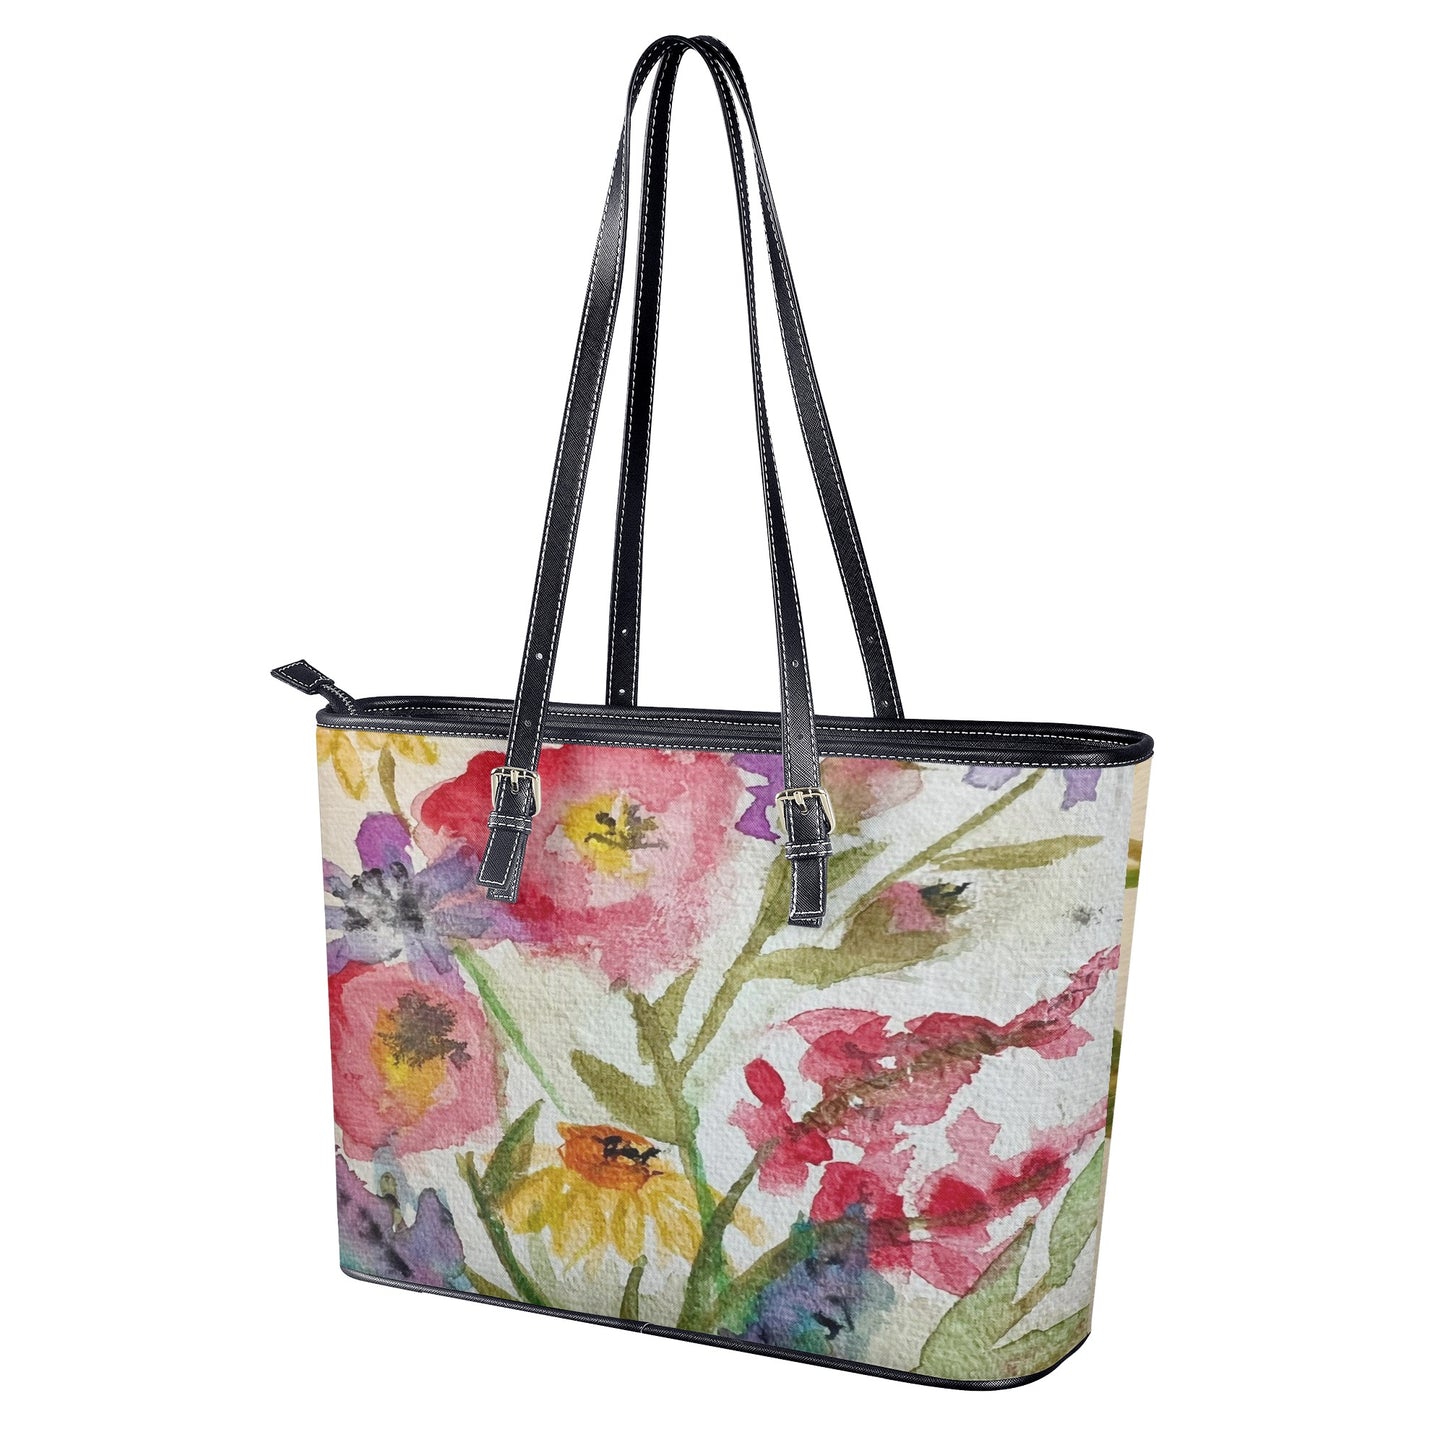 The Cathy Tote Bag